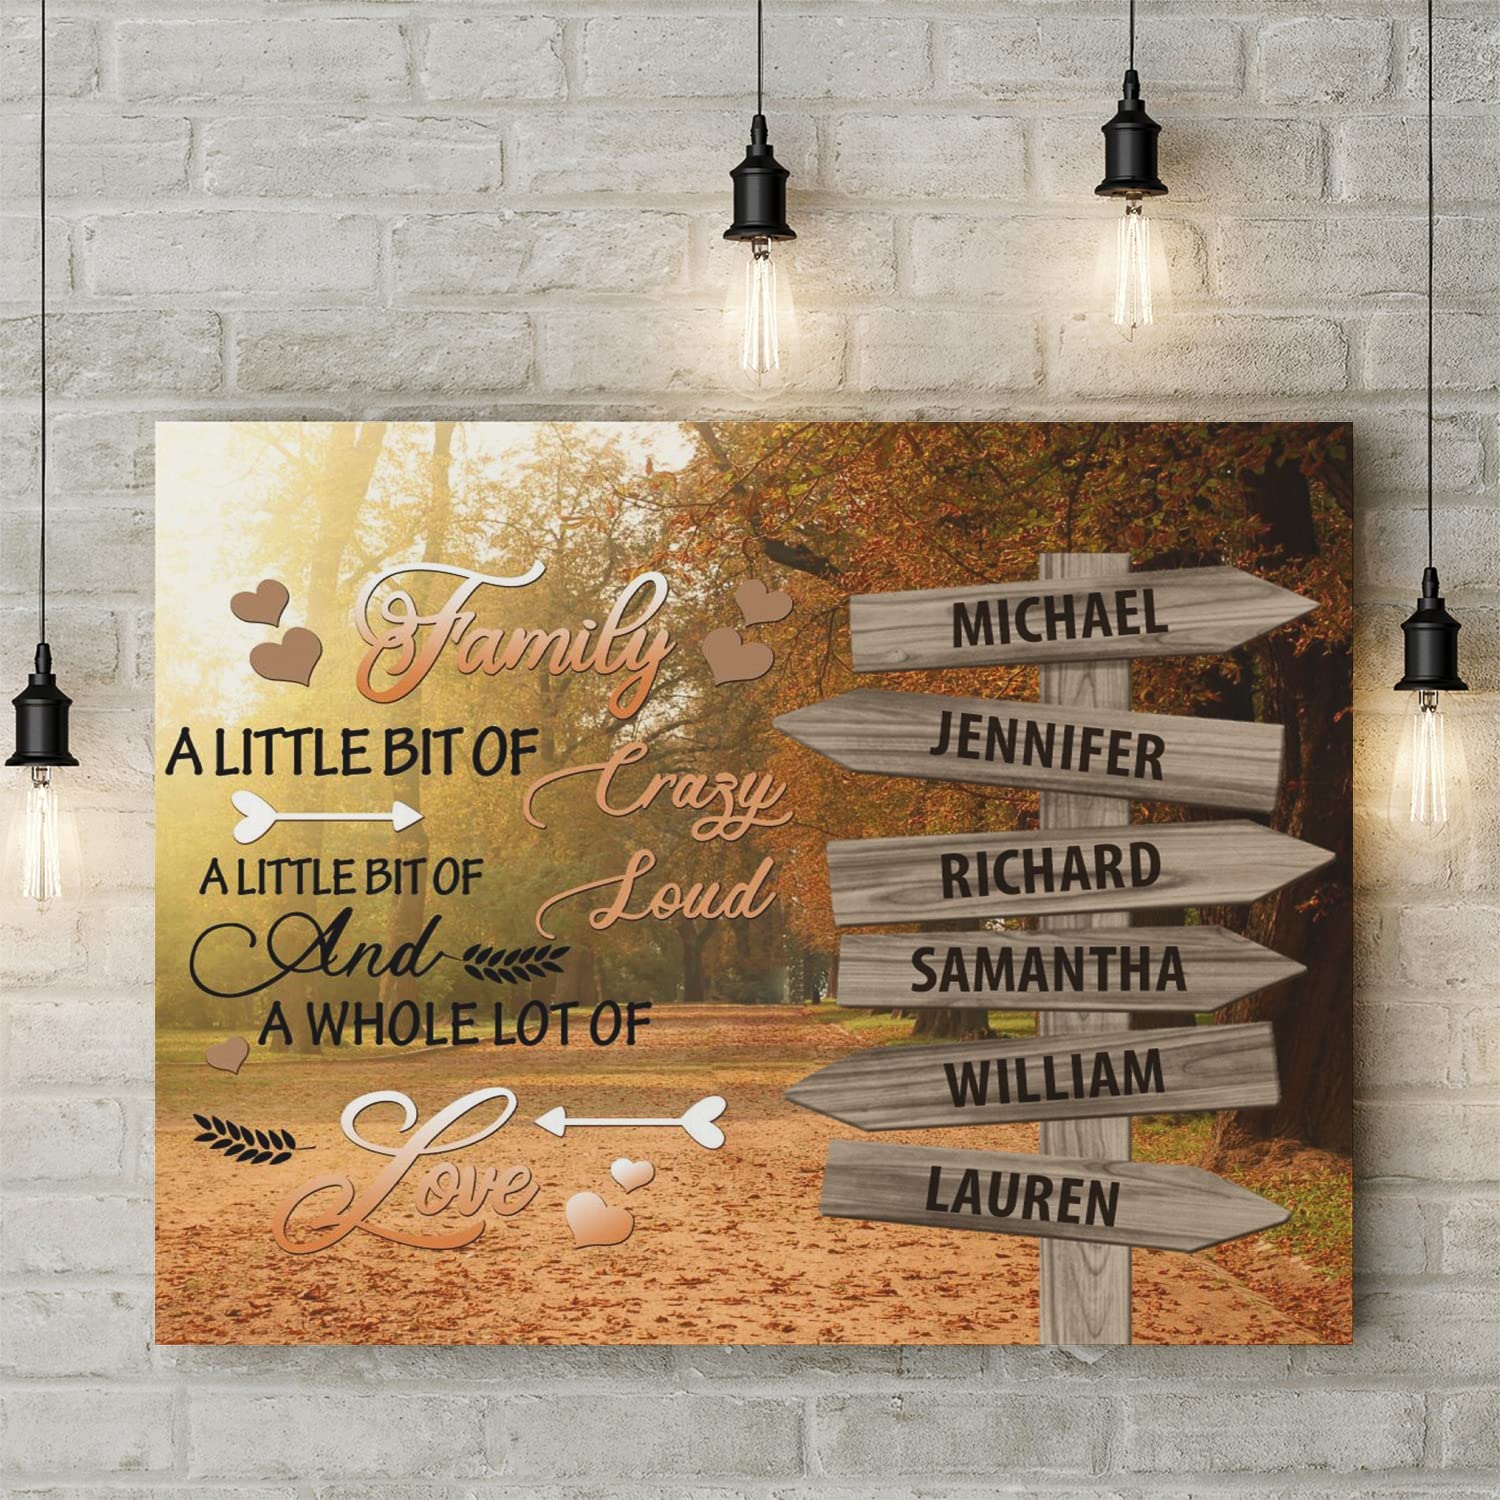 Personalized Canvas Wall Art For Family A Little Bit Of Crazy Loud Autumn Street Sign